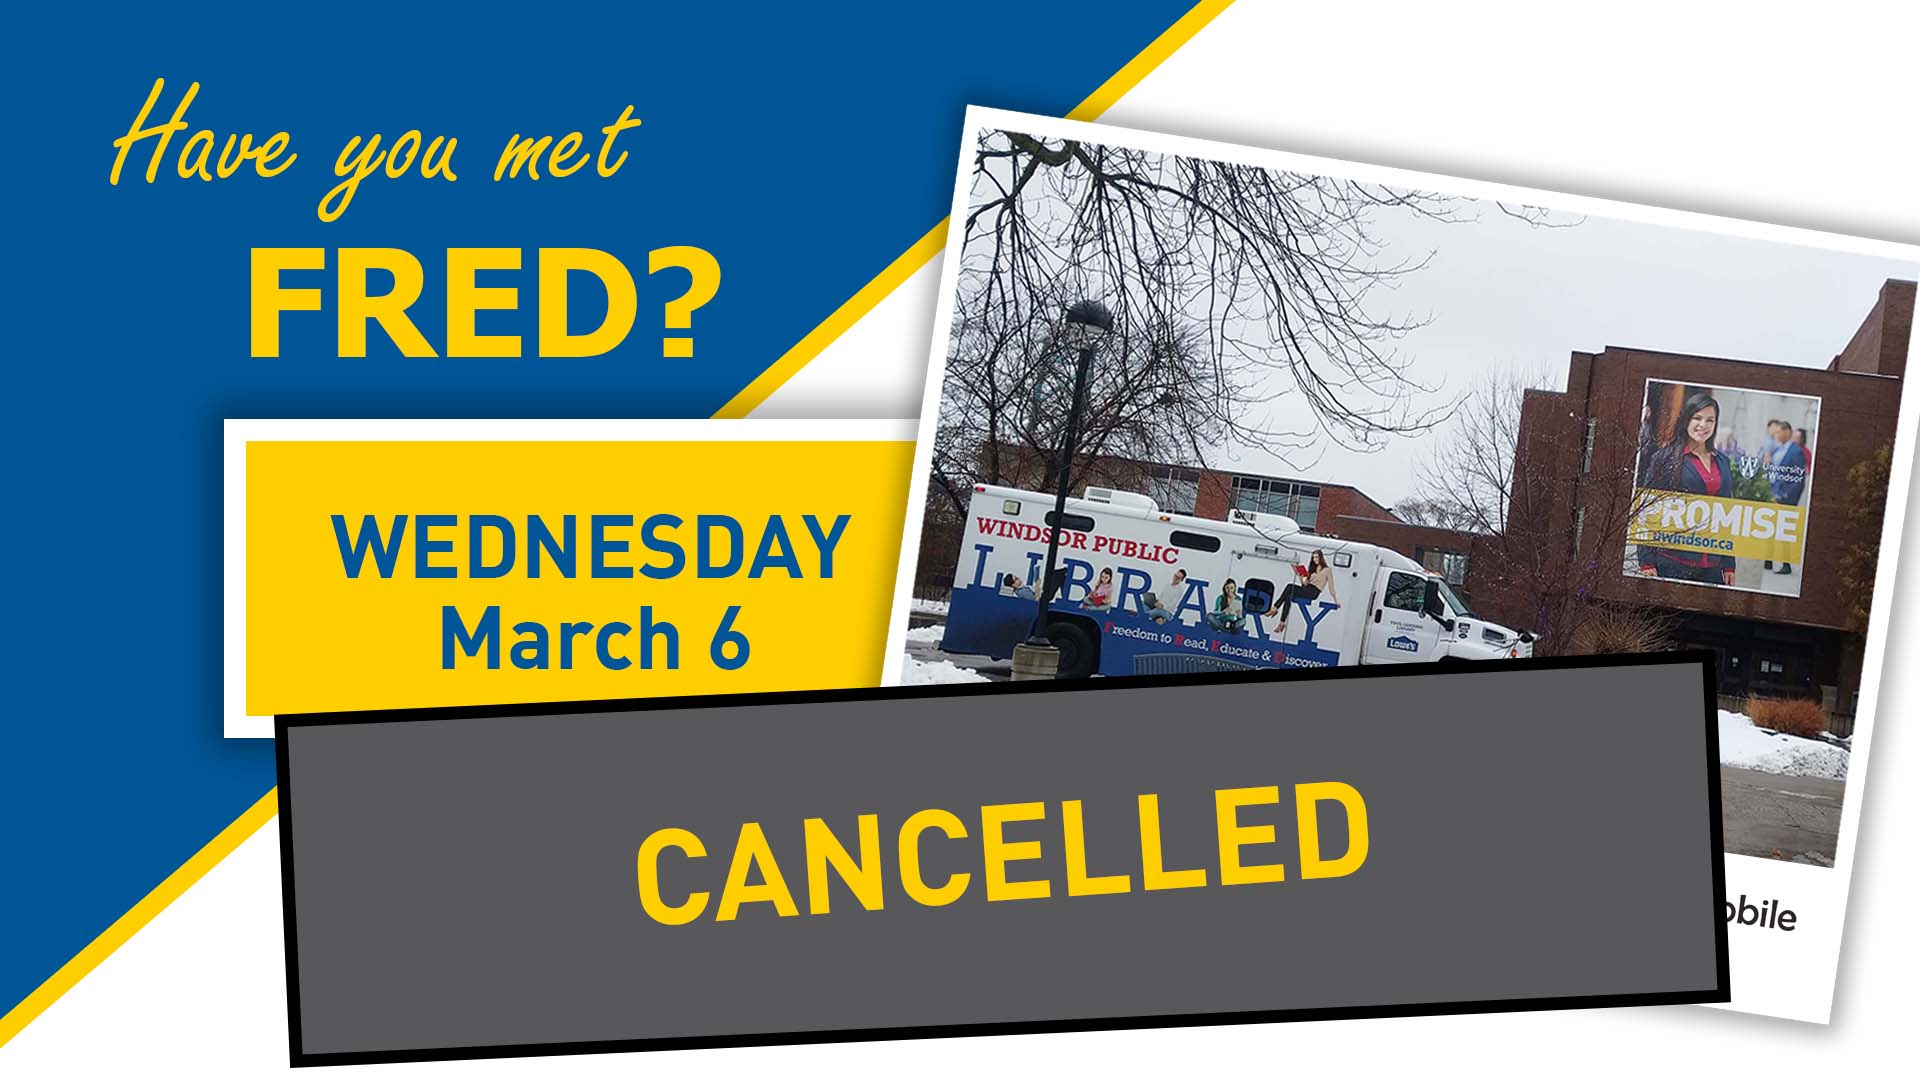 FRED bookmobile visit scheduled for March 6th is cancelled